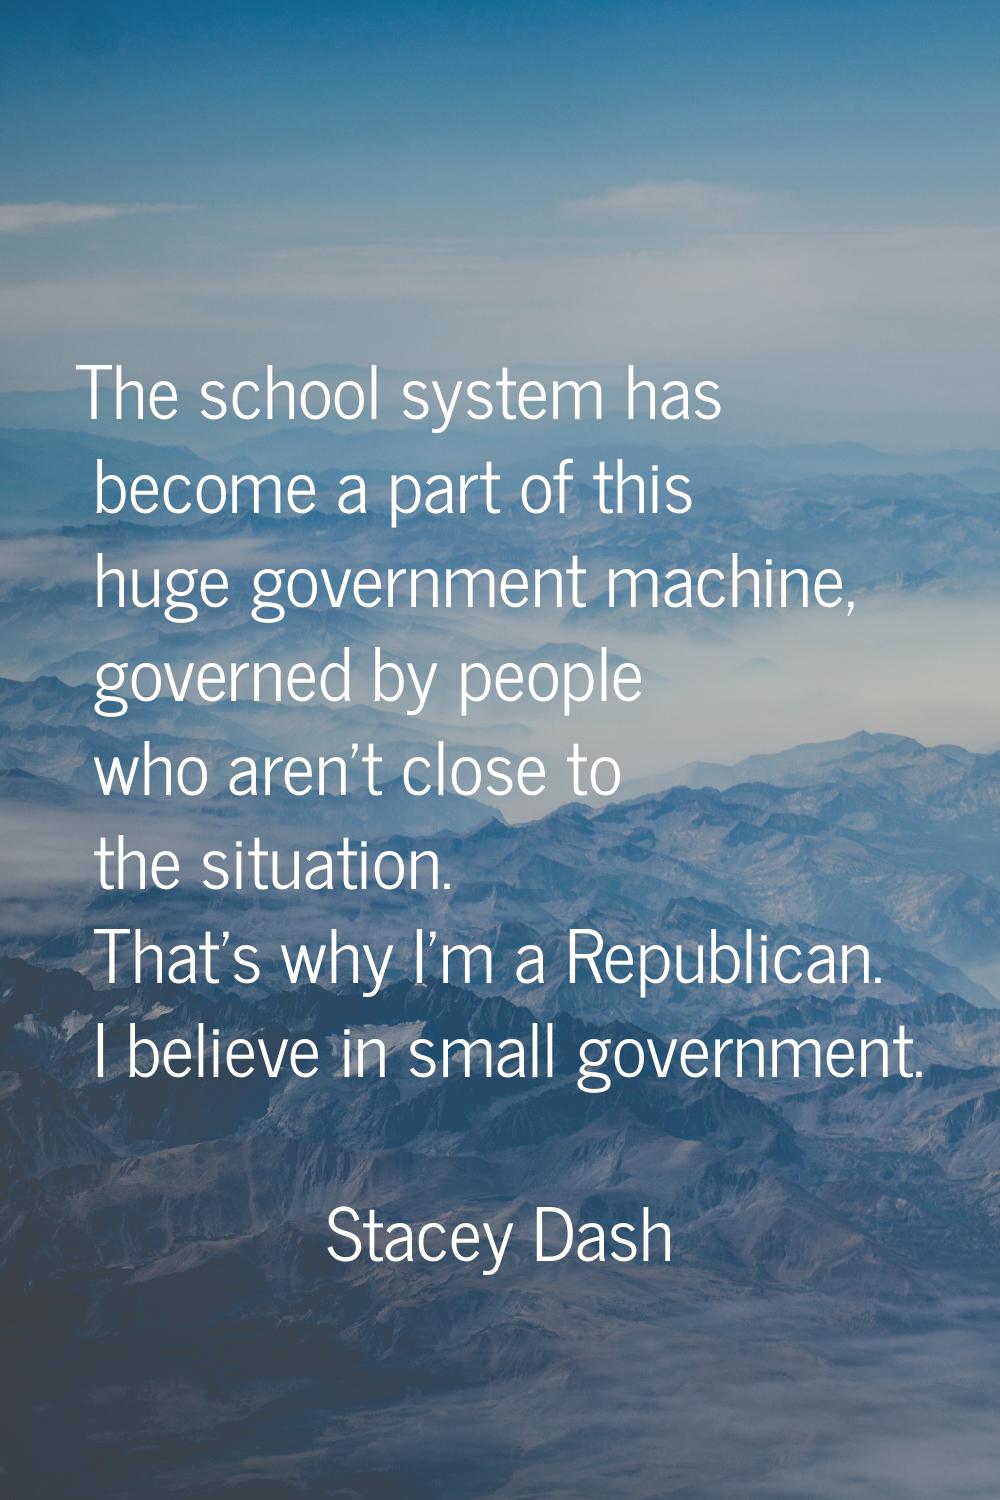 The school system has become a part of this huge government machine, governed by people who aren't 